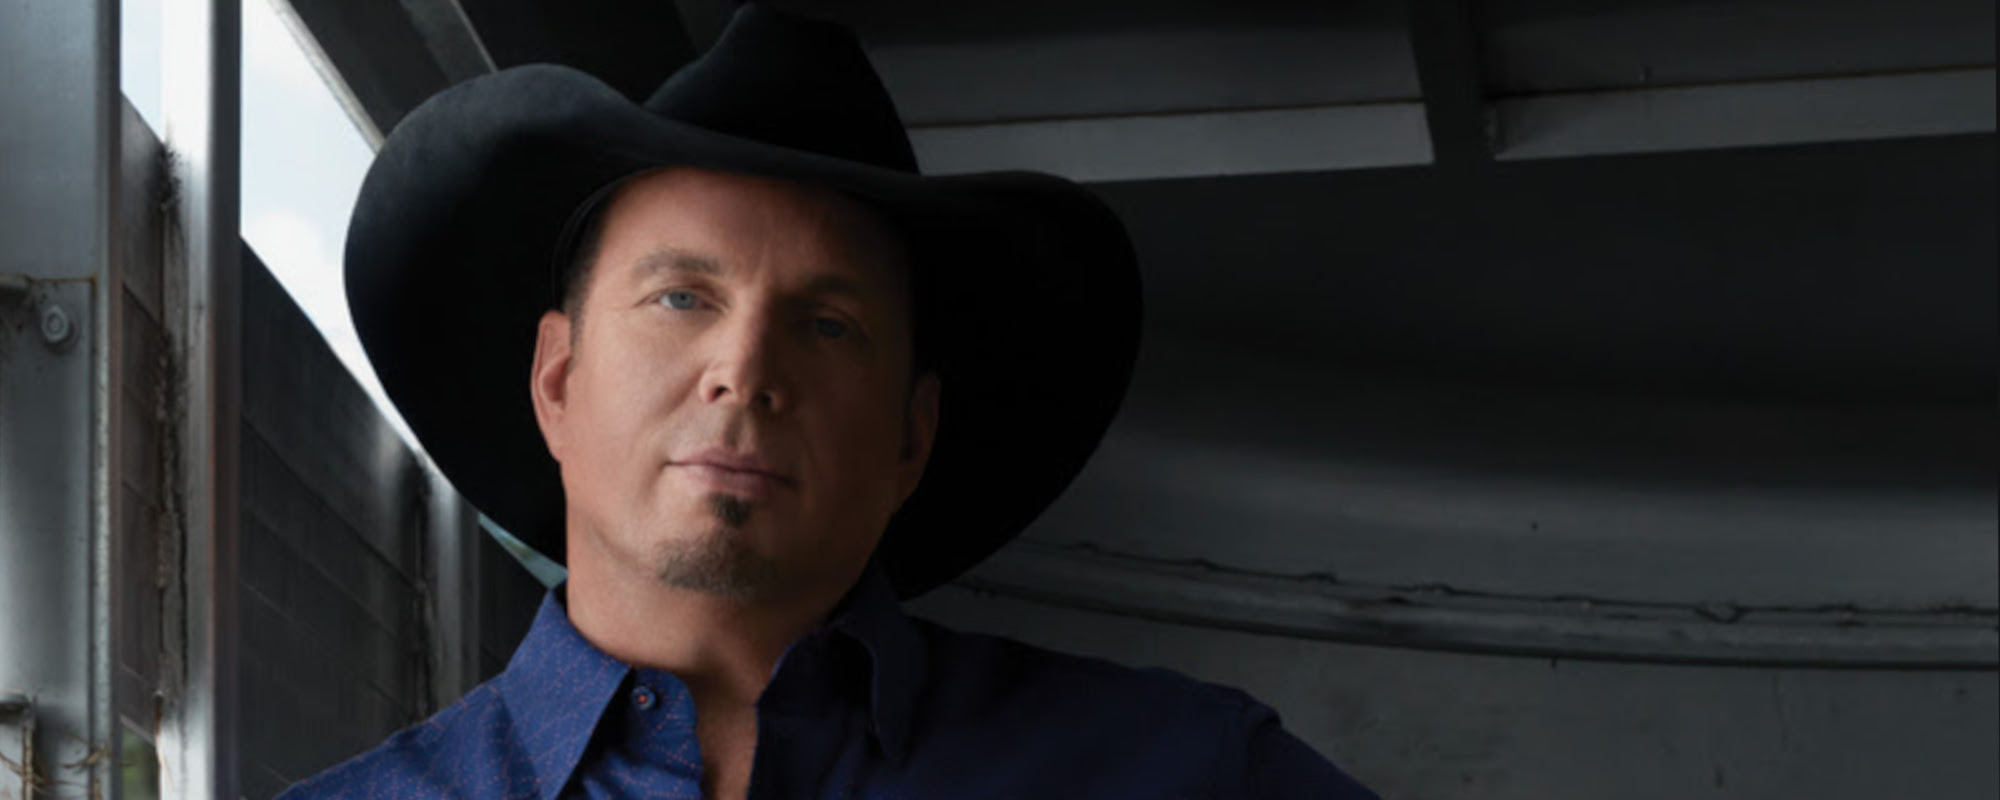 Behind the Song Lyrics: “If Tomorrow Never Comes,” Garth Brooks